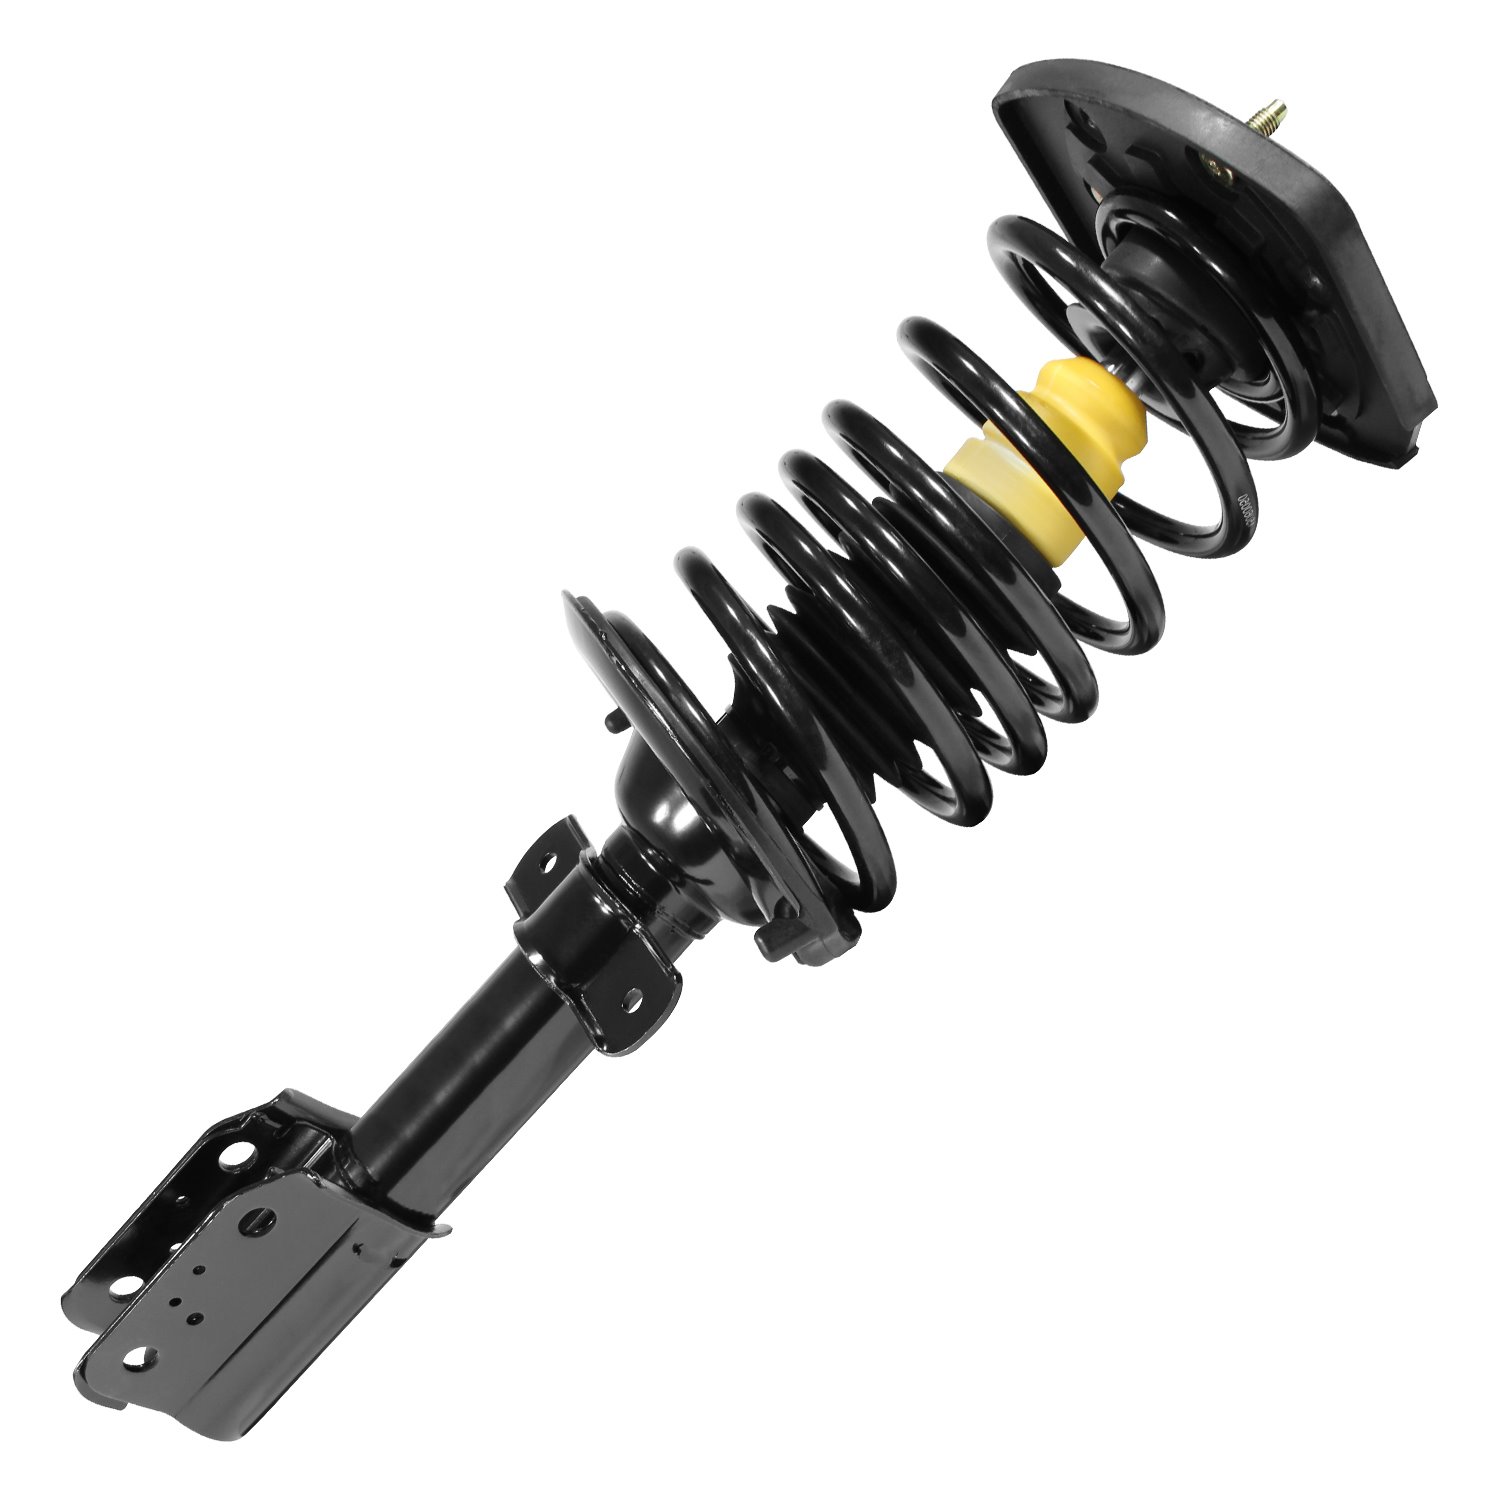 15311 Suspension Strut & Coil Spring Assembly Fits Select Buick LaCrosse, Buick Allure, Chevy Impala, Pontiac Grand Prix